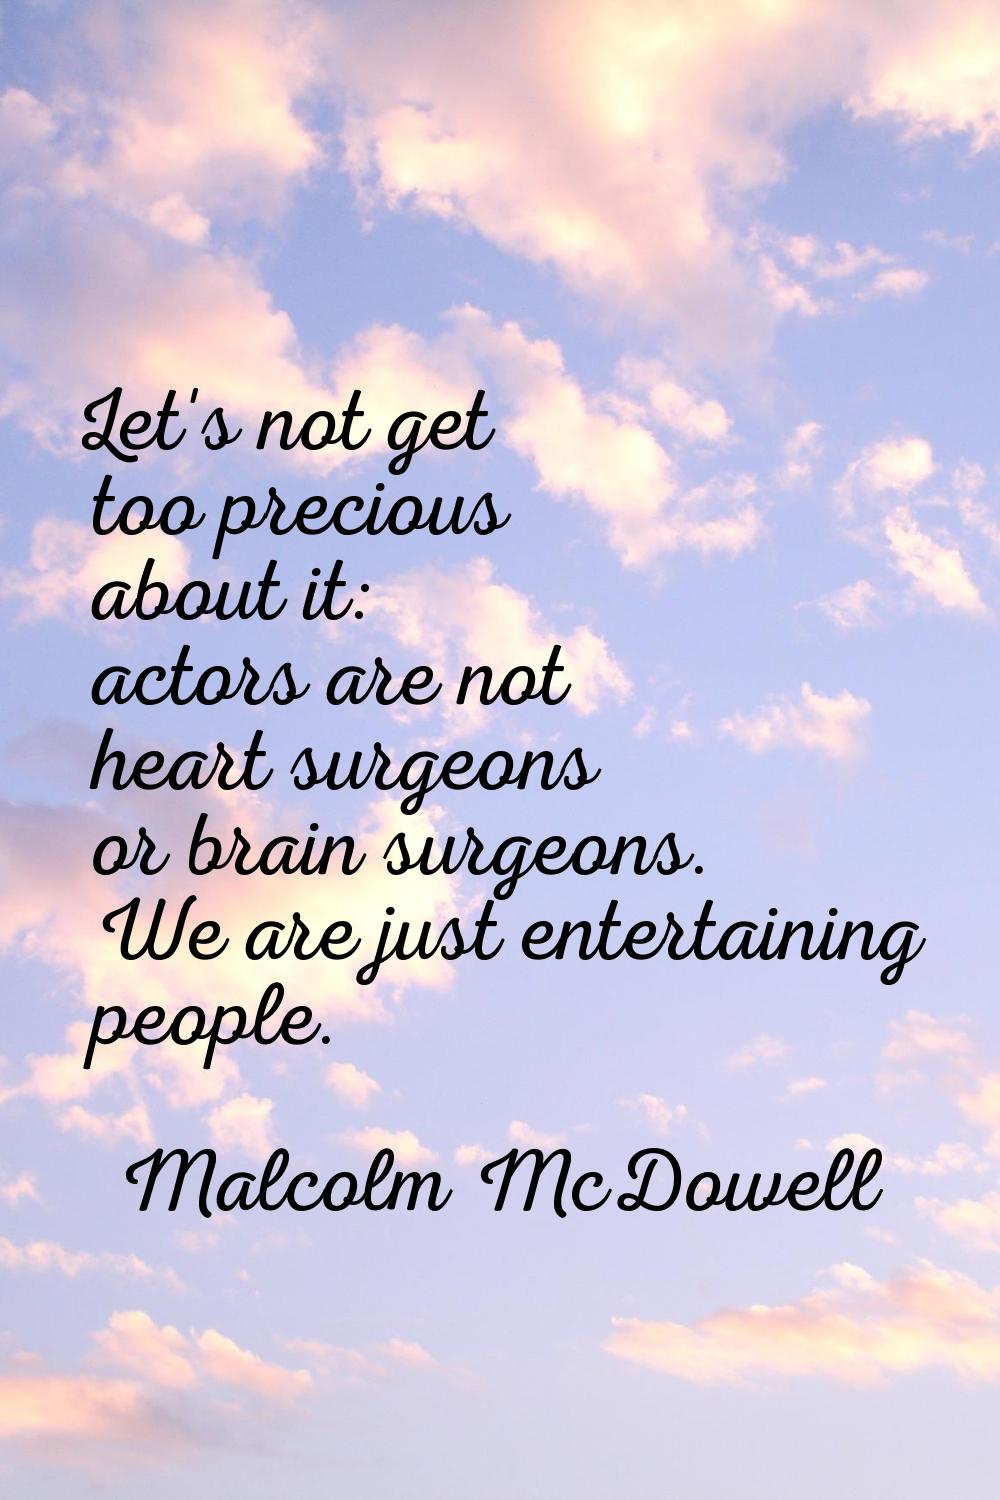 Let's not get too precious about it: actors are not heart surgeons or brain surgeons. We are just e